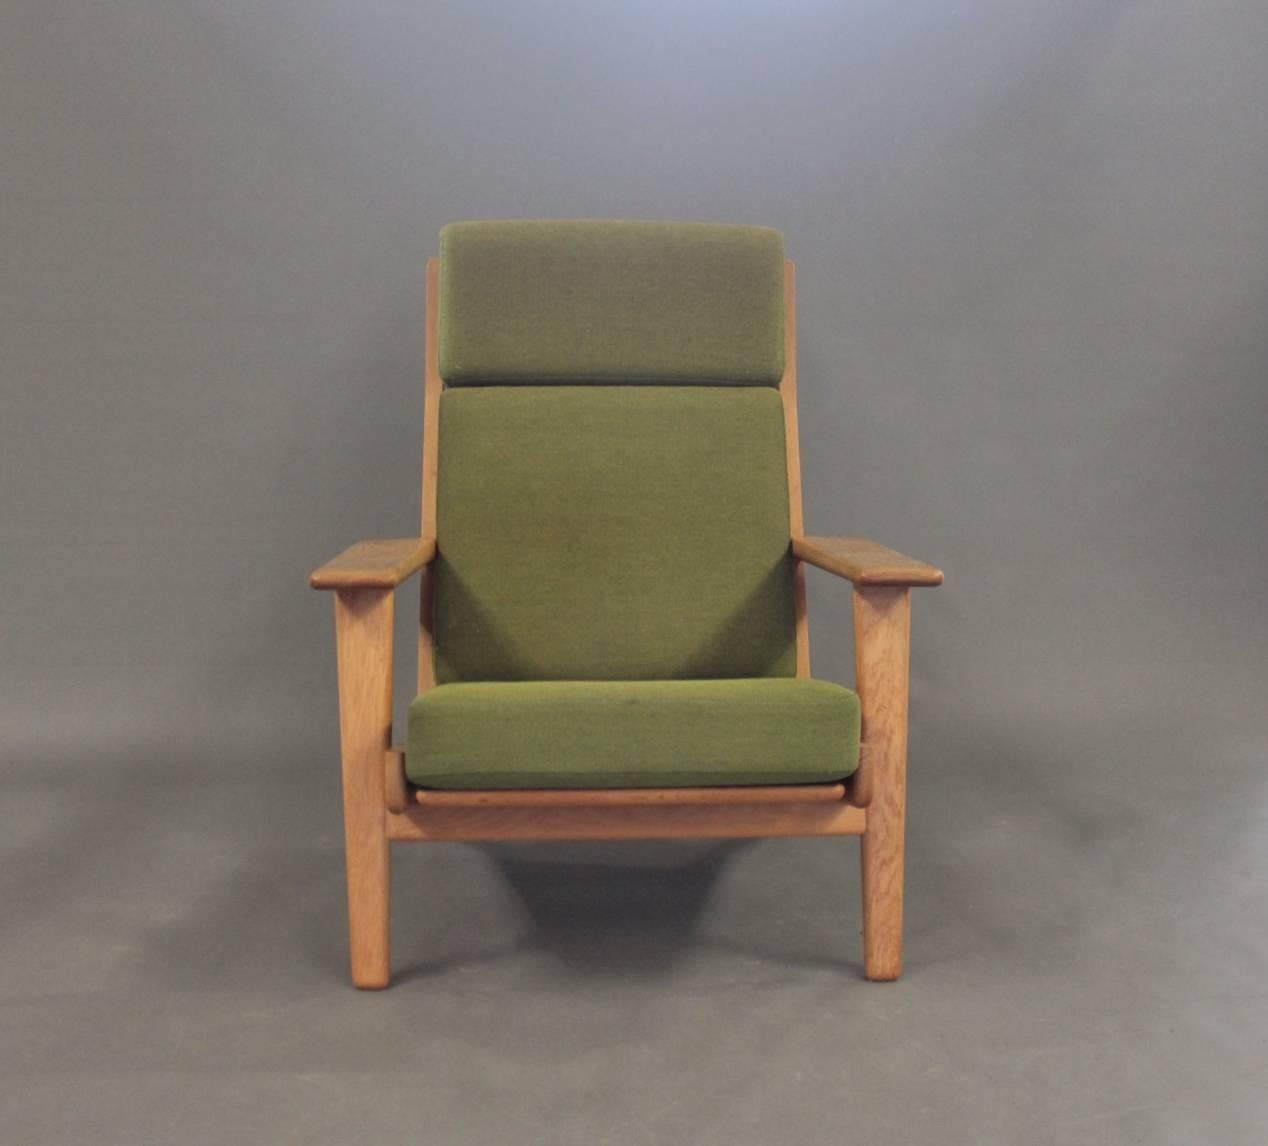 Armchair with high back, model GE290A, designed by Hans J. Wegner in the 1950s and manufactured by GETAMA in the 1960s. The chair is made of oak and the cushions are of dark green upholstery.